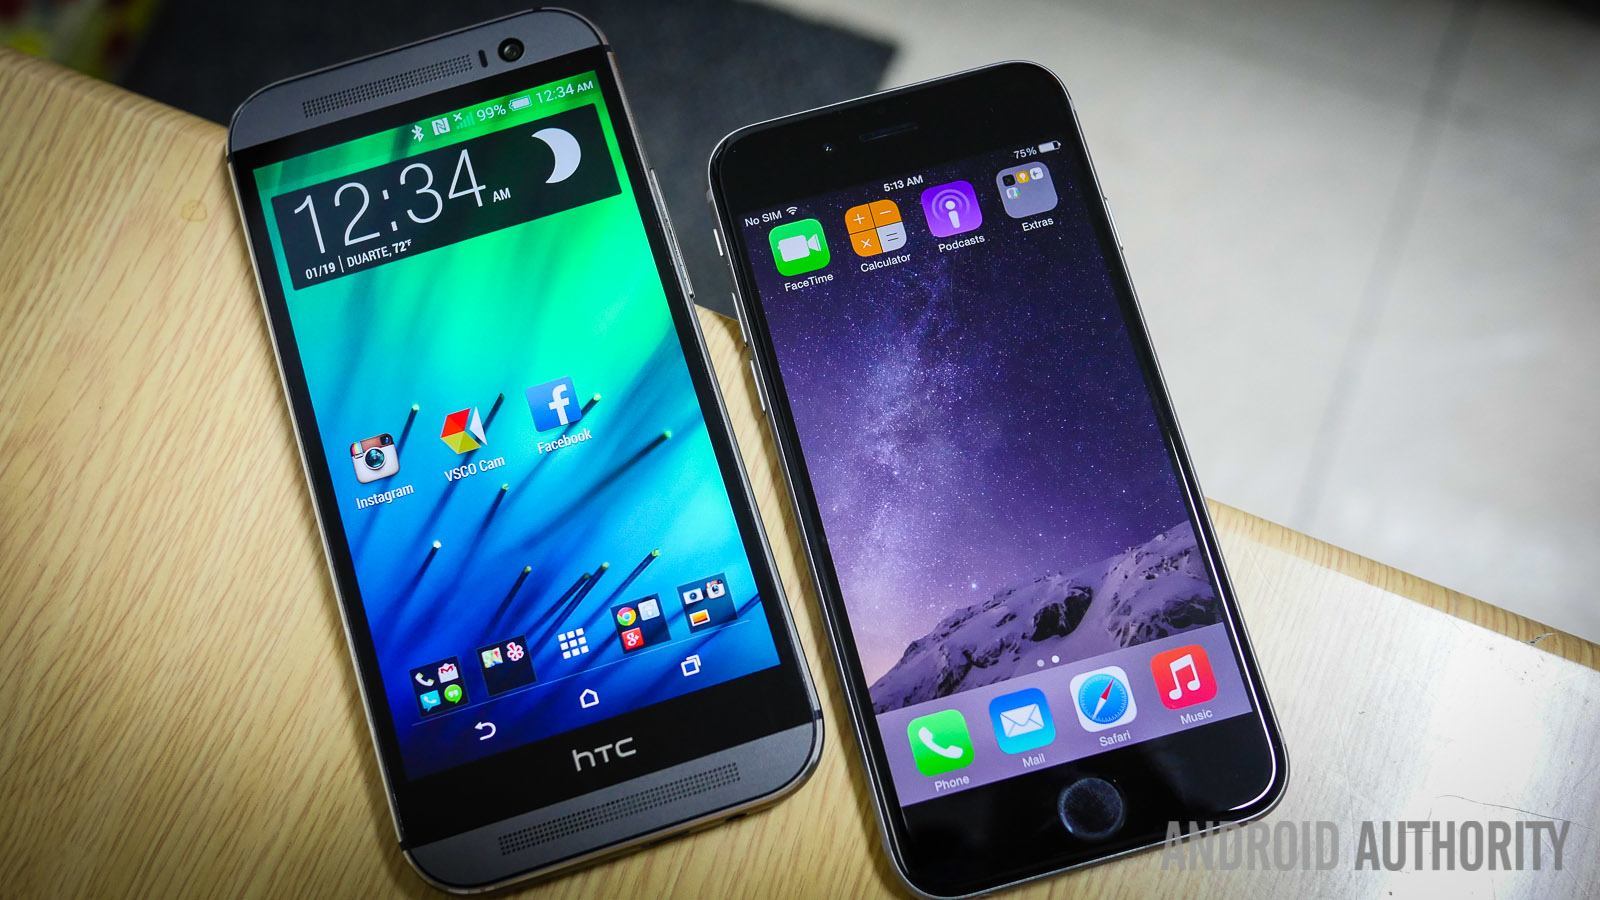 iphone 6 plus vs htc one m8 quick look aa (1 of 14)